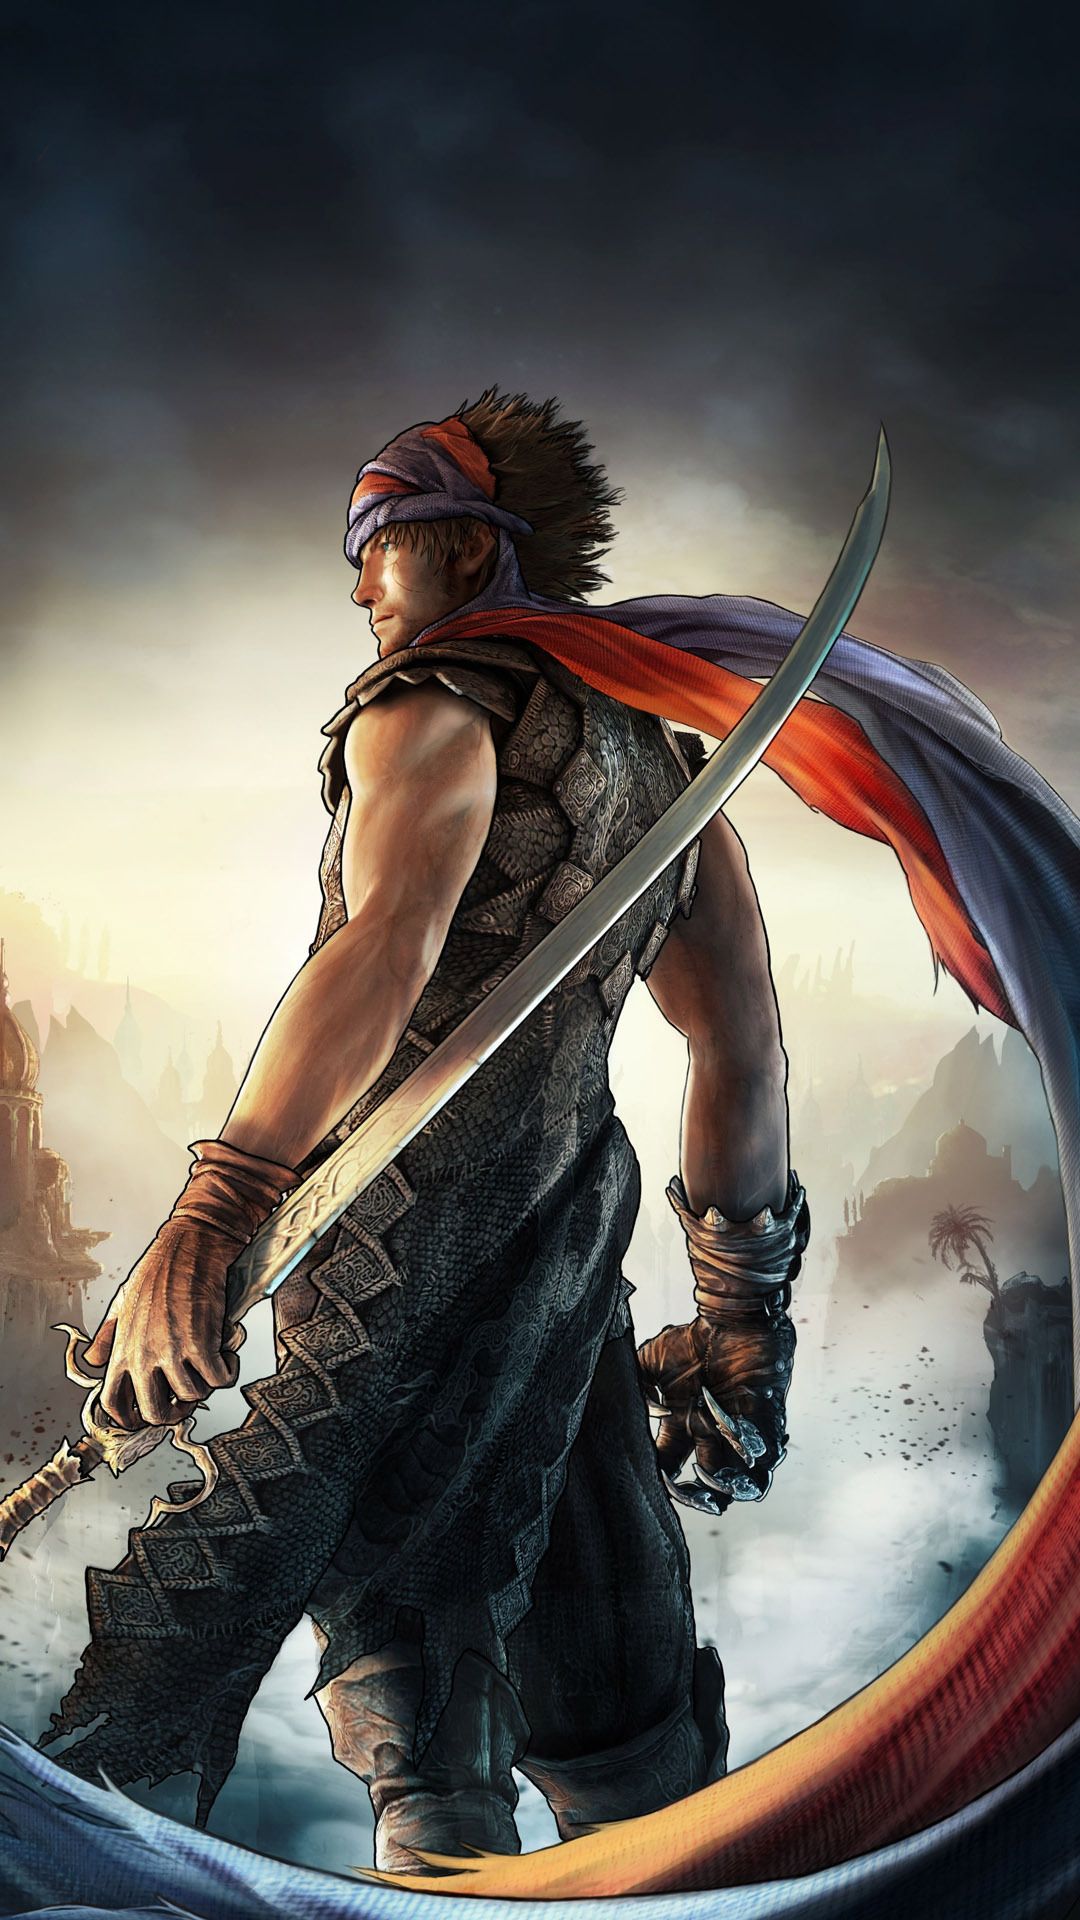 hd iphone wallpapers for iPhone 6 Prince of persia